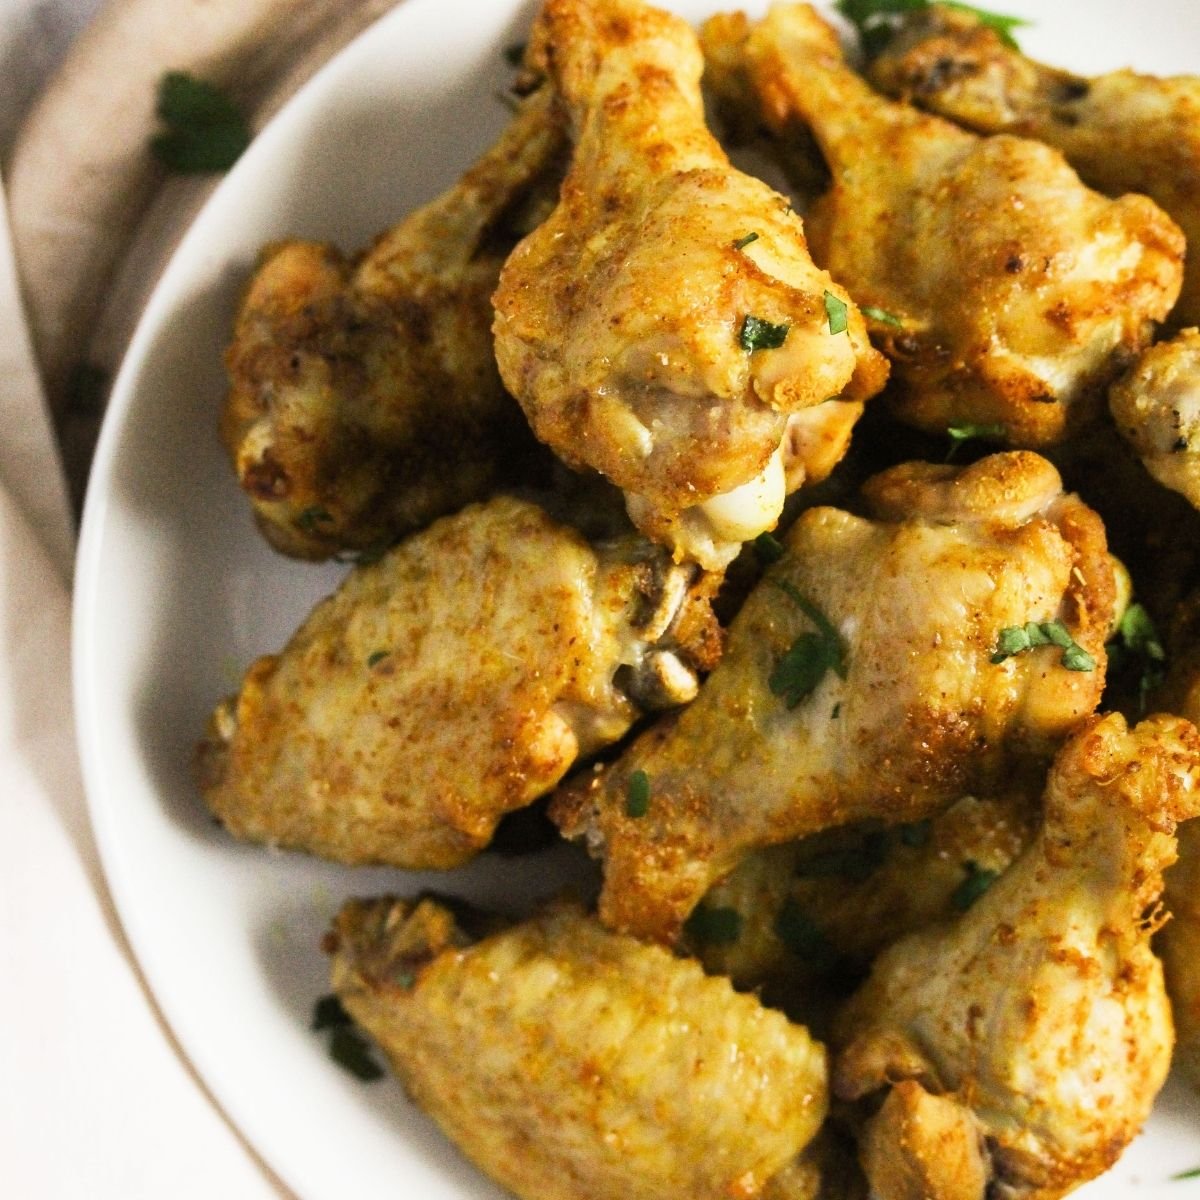 How to Parboil Chicken Wings - The Fast Recipe